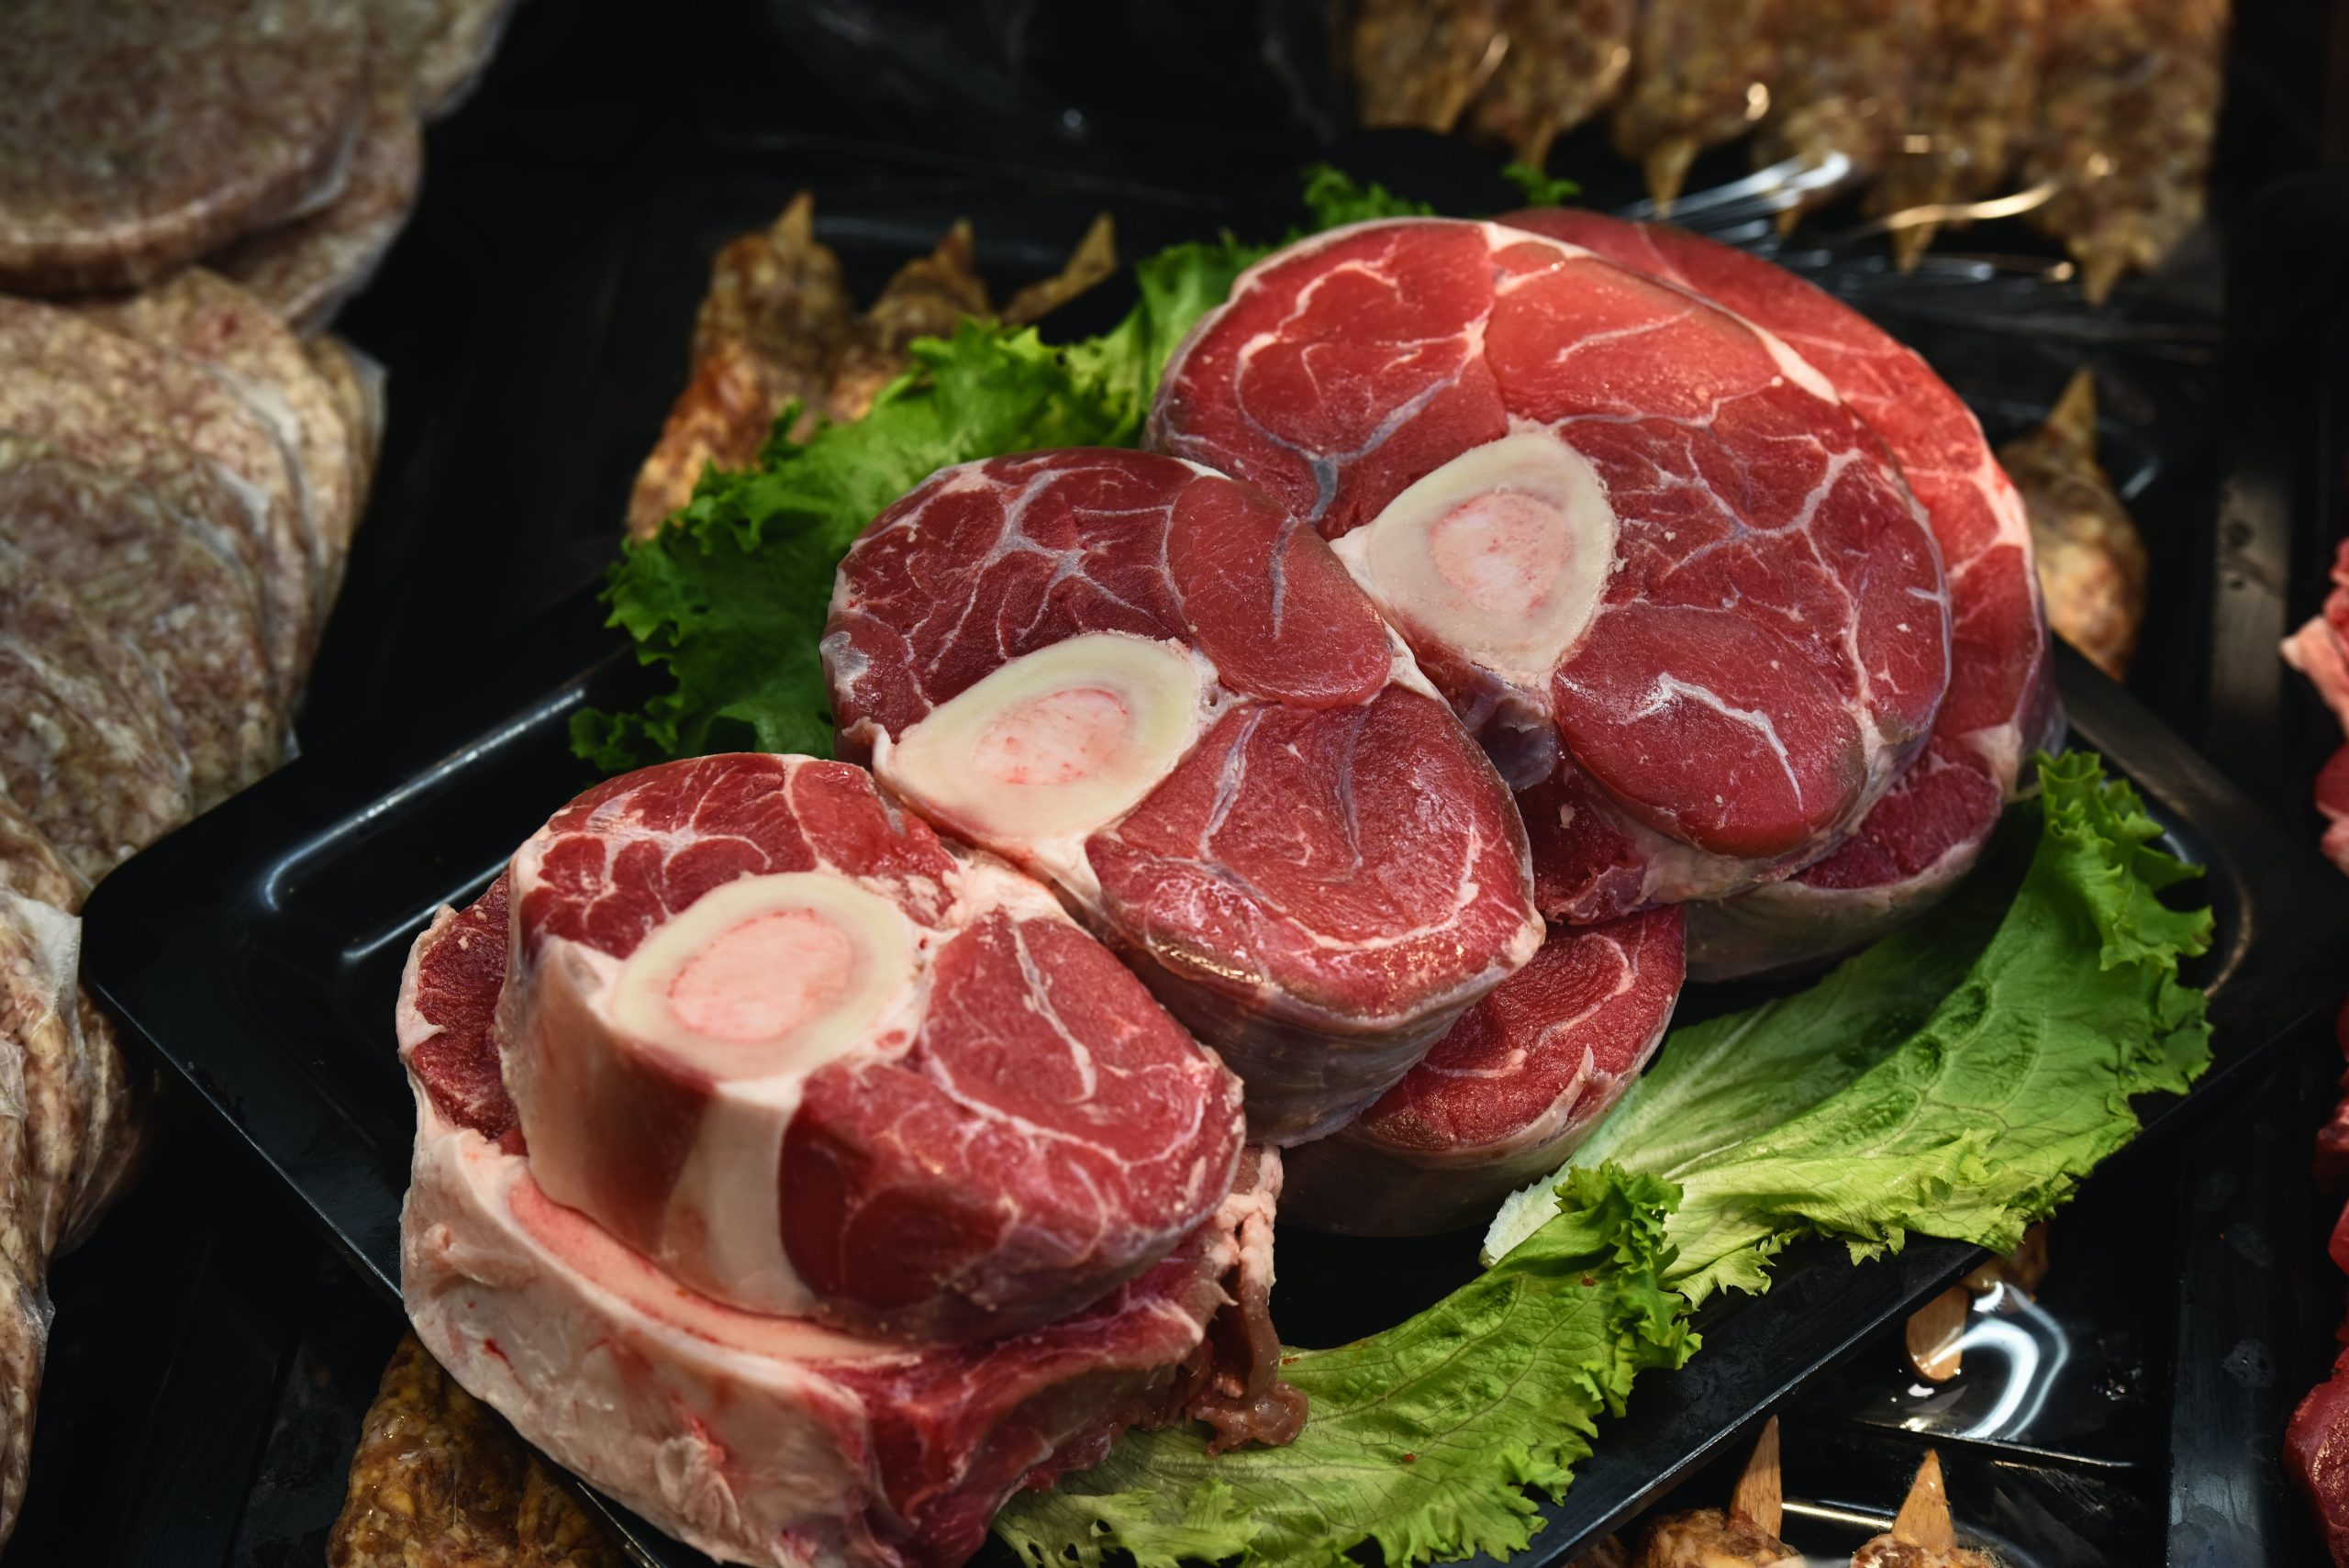 Meat's Role in Modern Diets: Health Benefits and Risks Explored